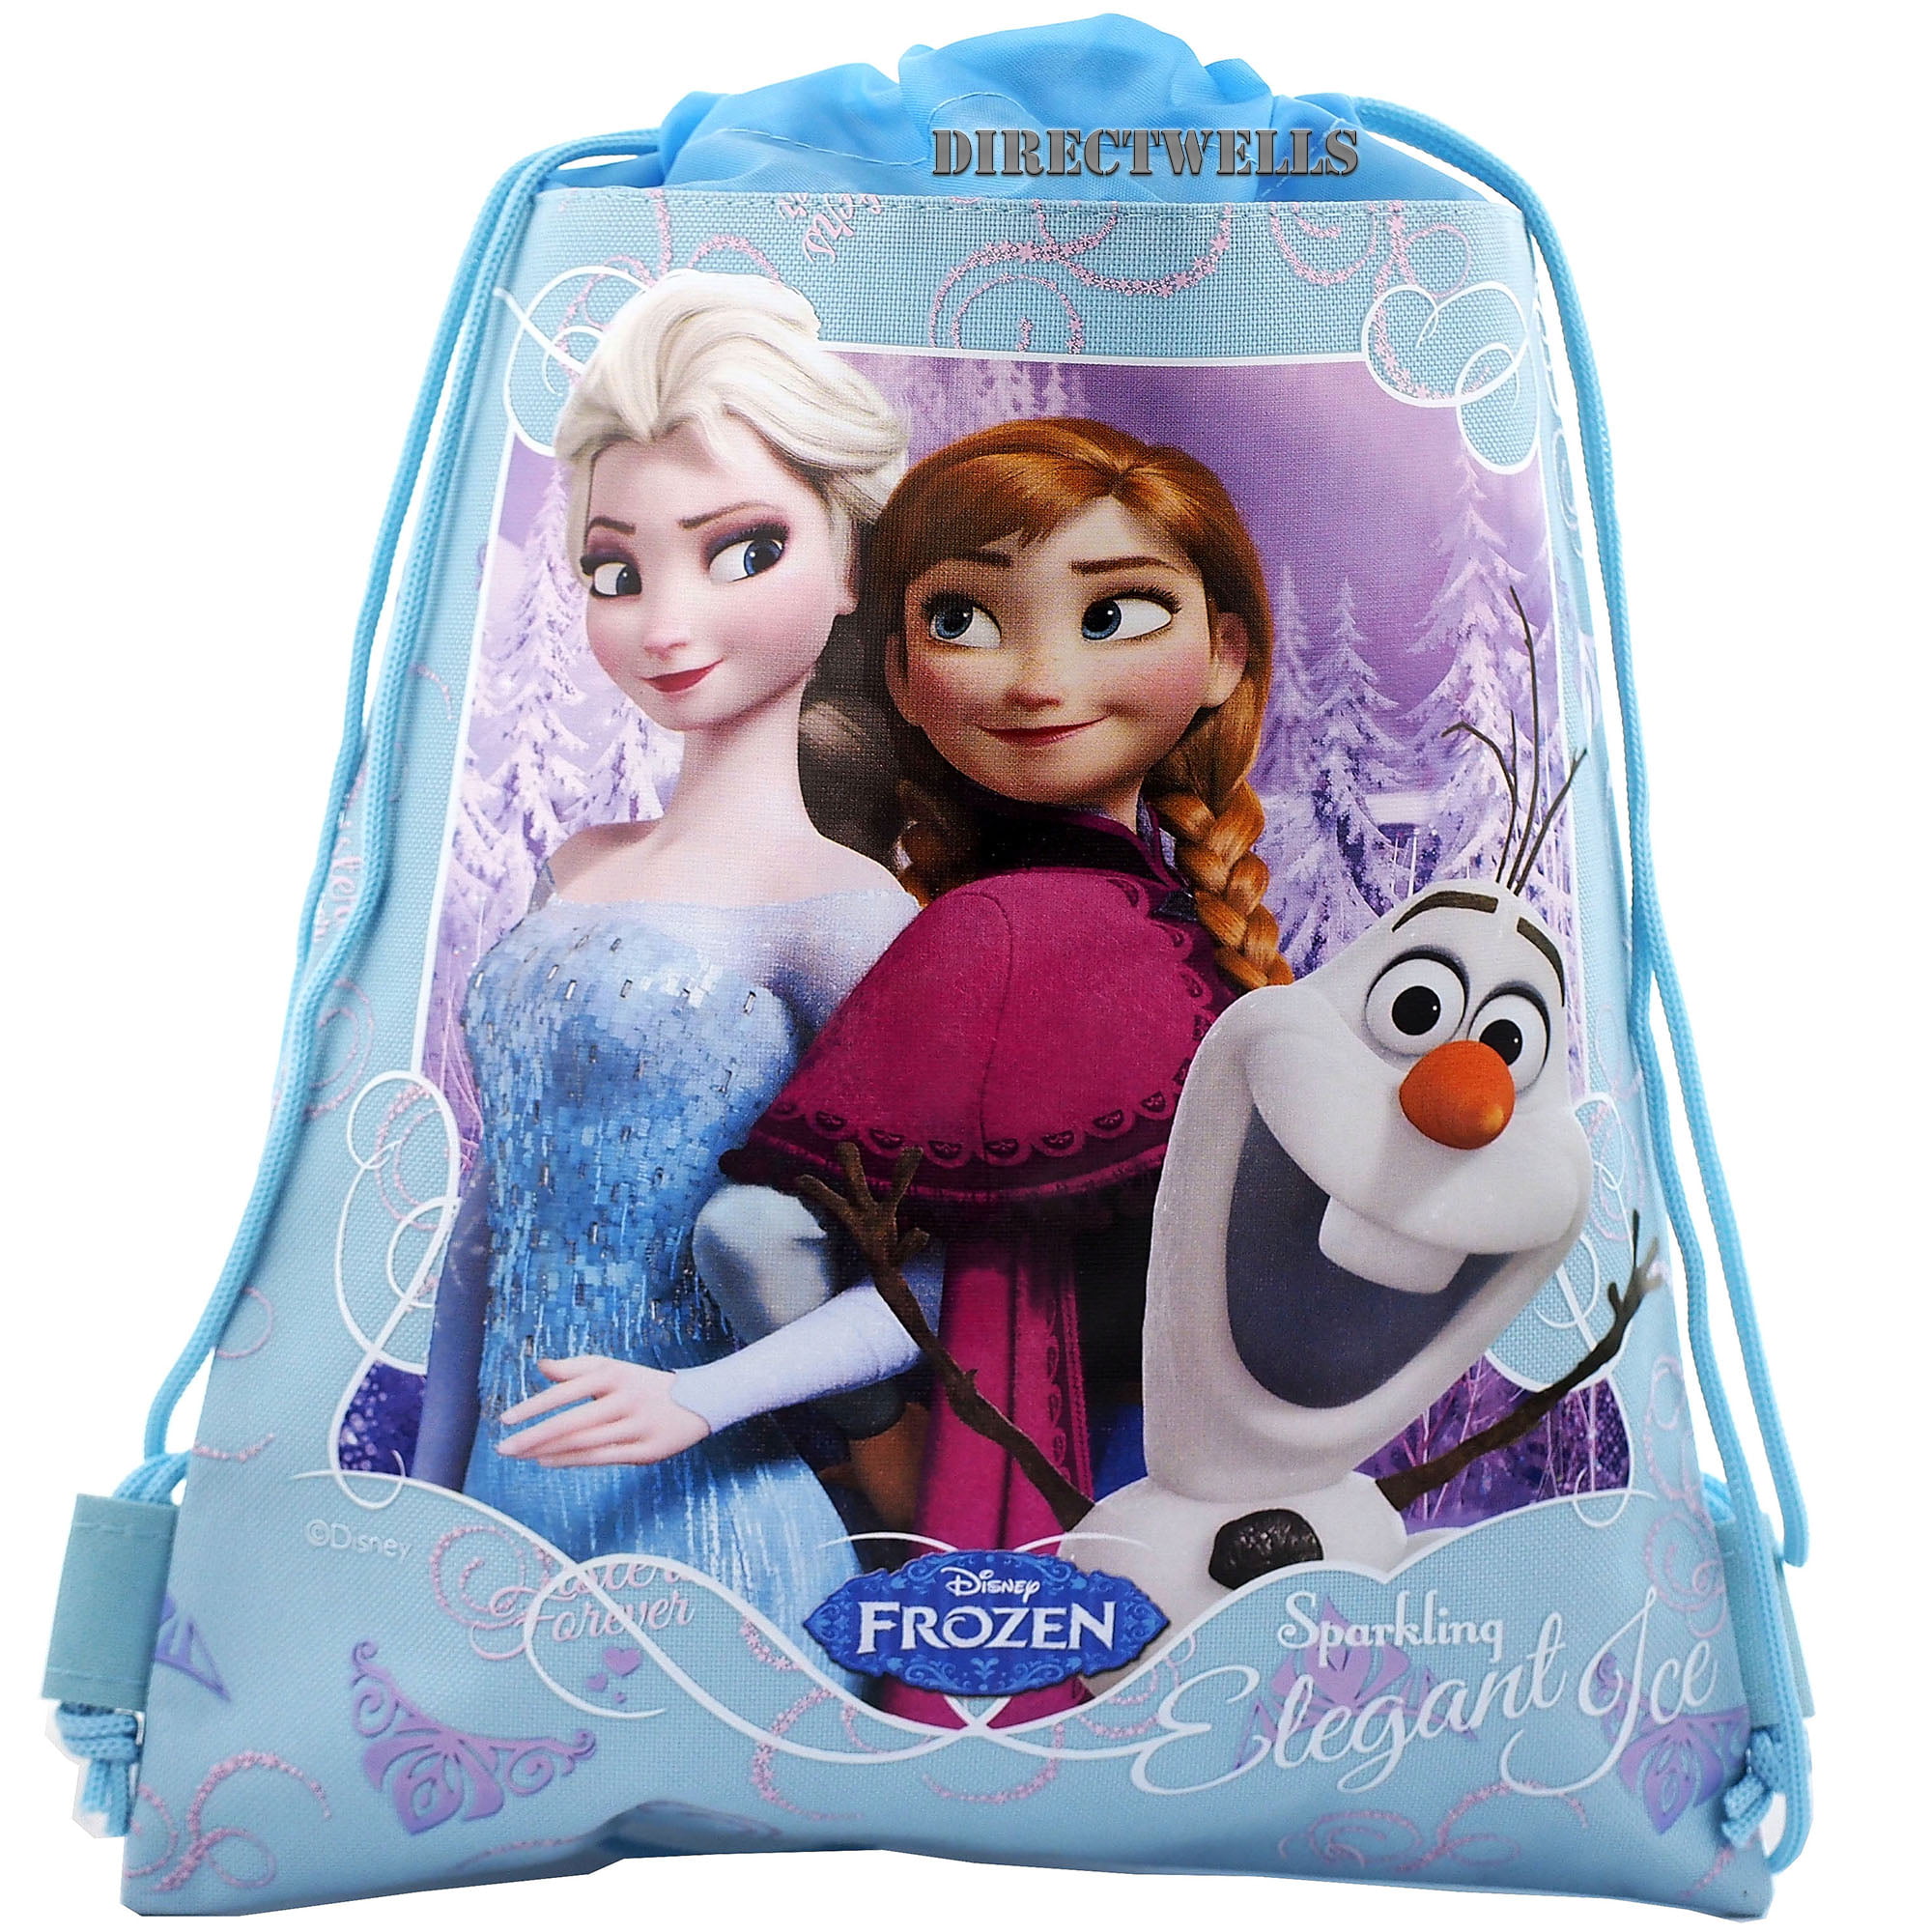 Elsa Plush Doll 19 Inches Tall Disney Paper Tote Bag Rope Handle 5 Assorted Stickers 3 Piece Bundle Frozen